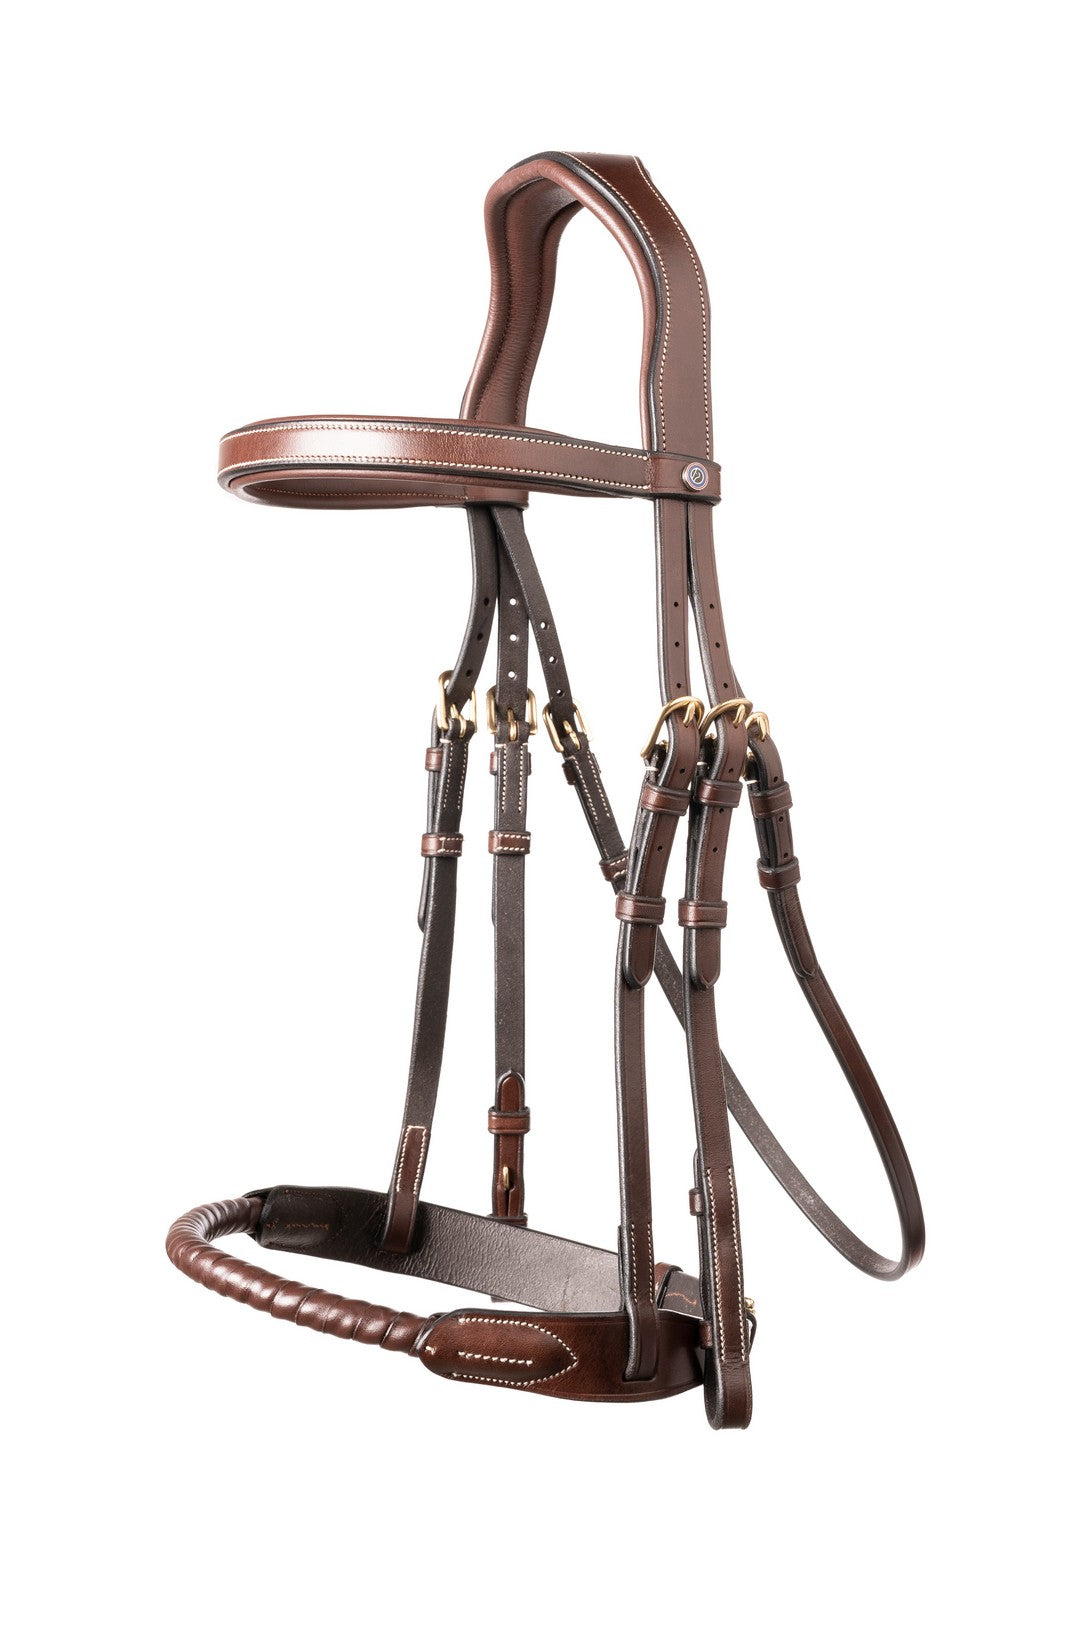 TRUST bridle Dublin leather covered rope noseband gold buckle Brown